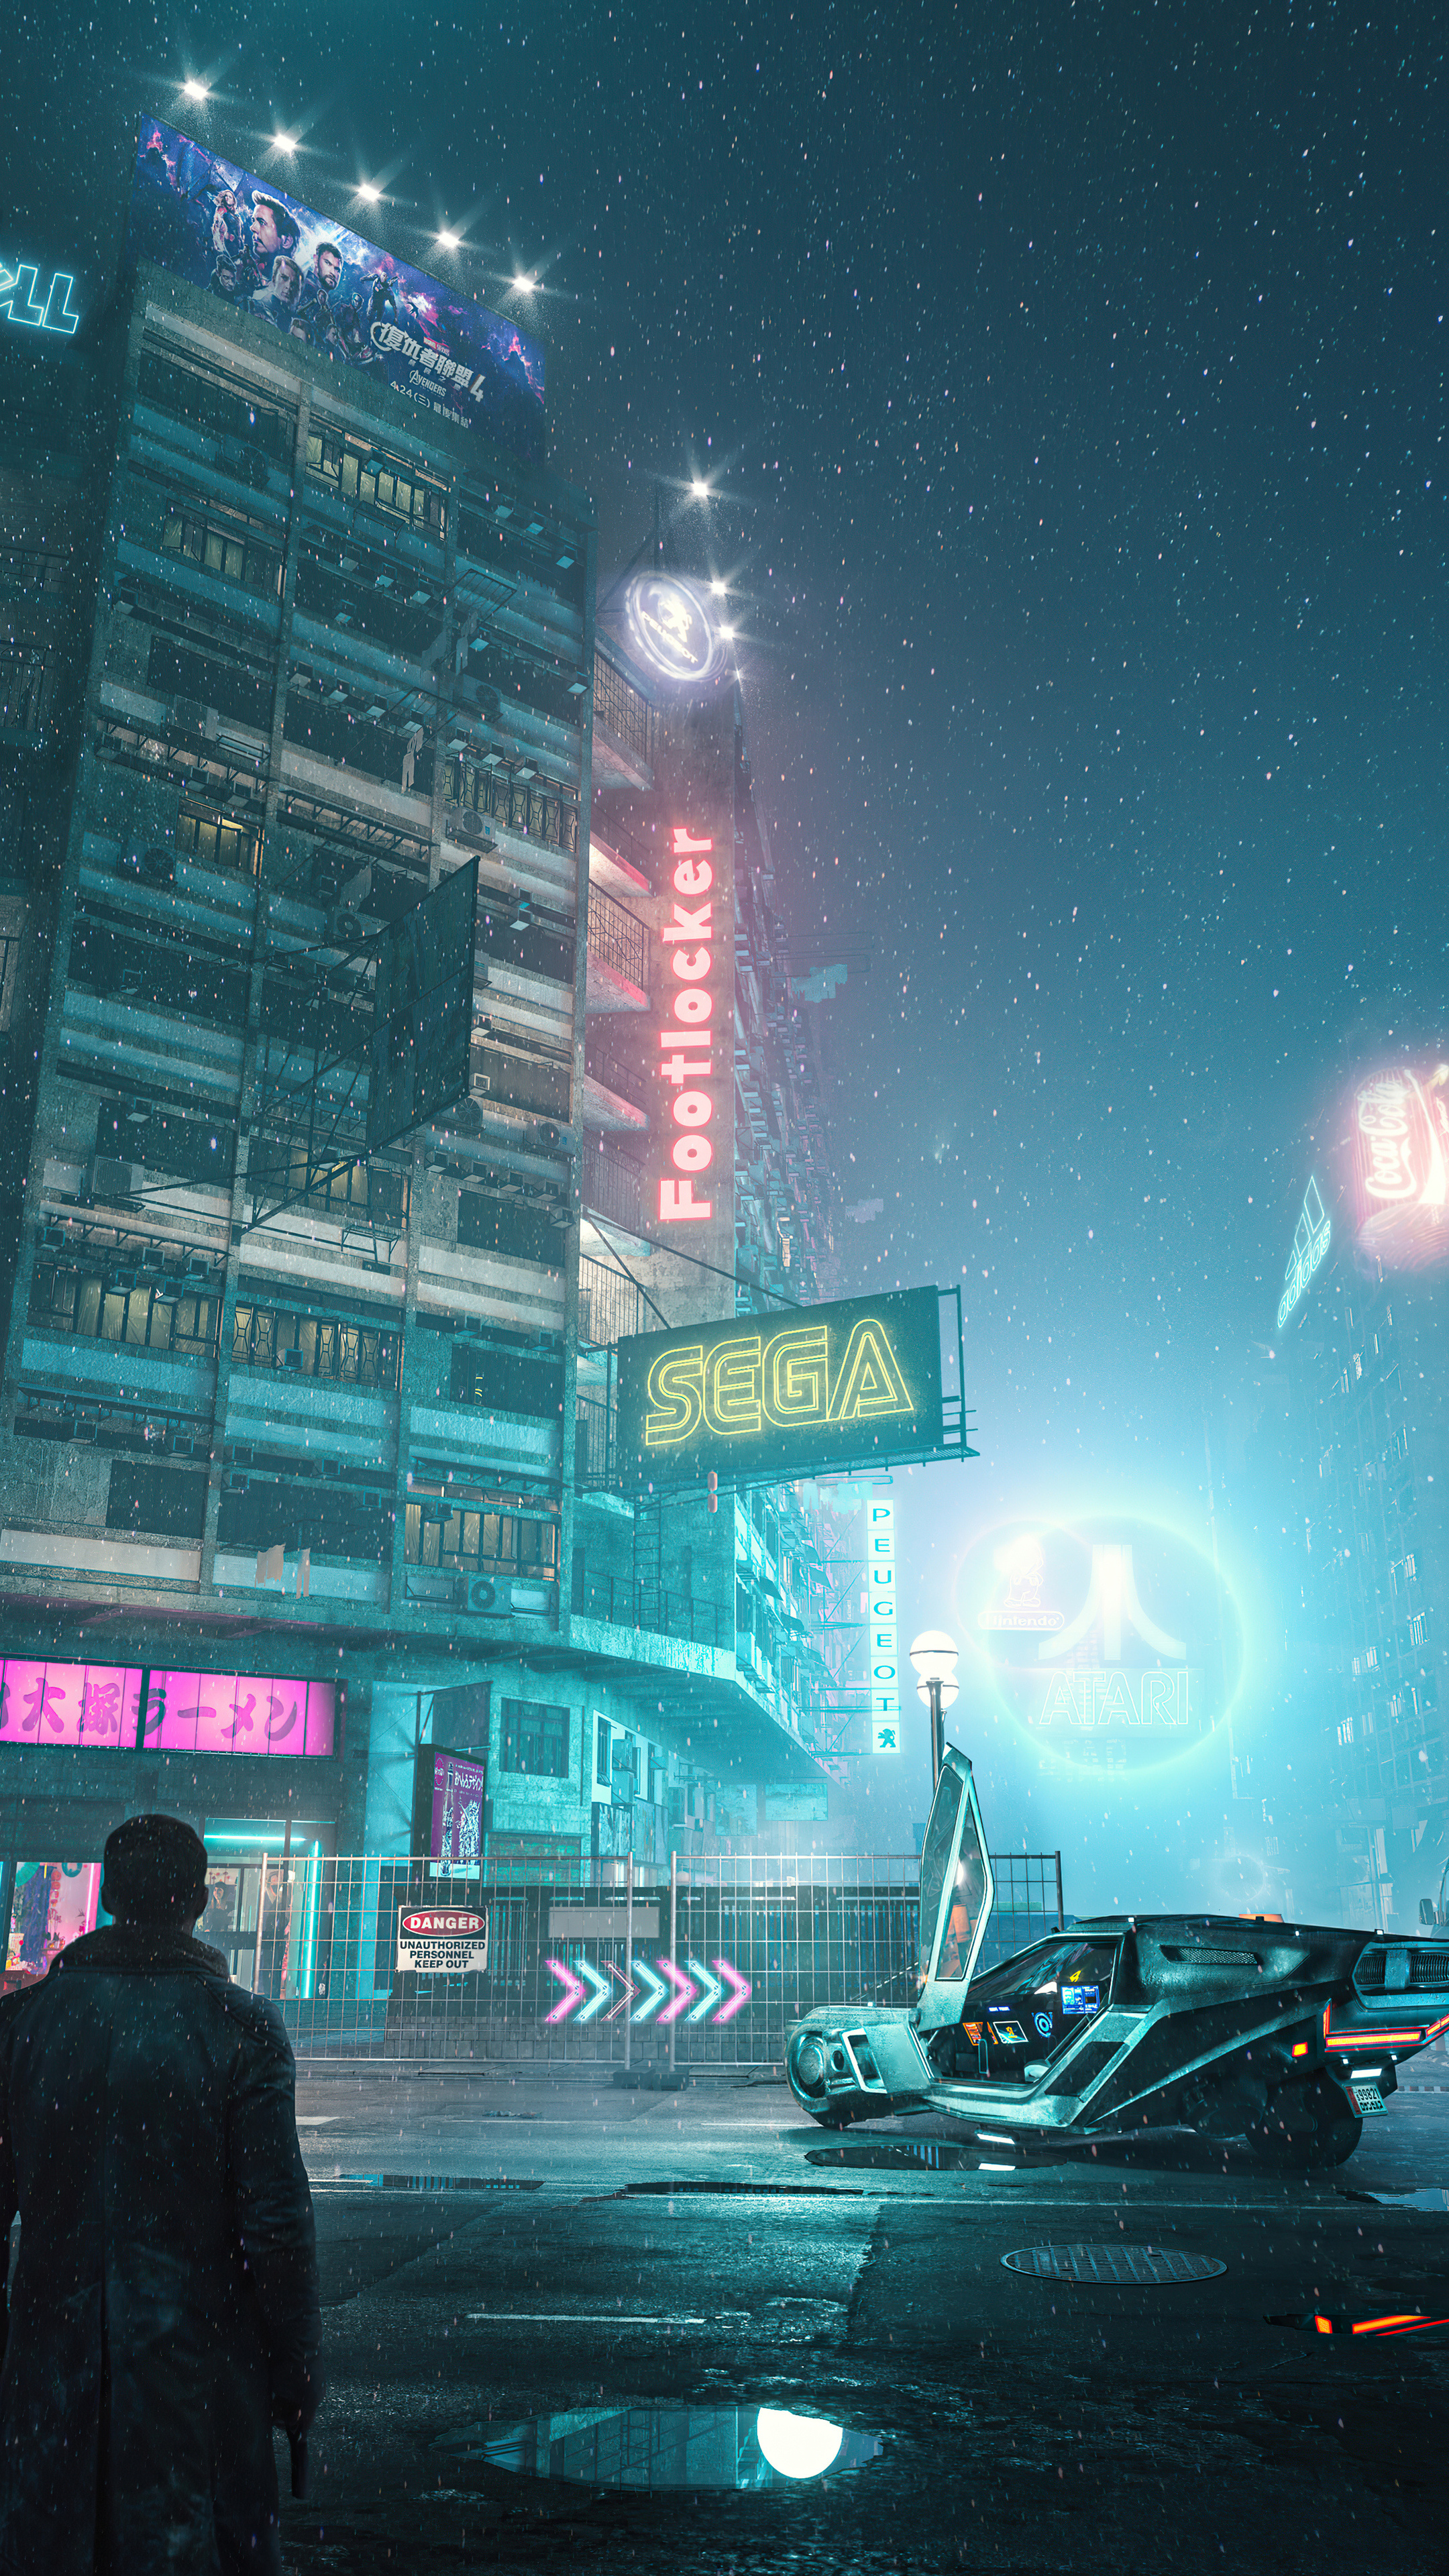 Blade Runner 2049 Tokyo, Cyberpunk cityscape, 4K Sony Xperia wallpapers, HD images, 2160x3840 4K Phone